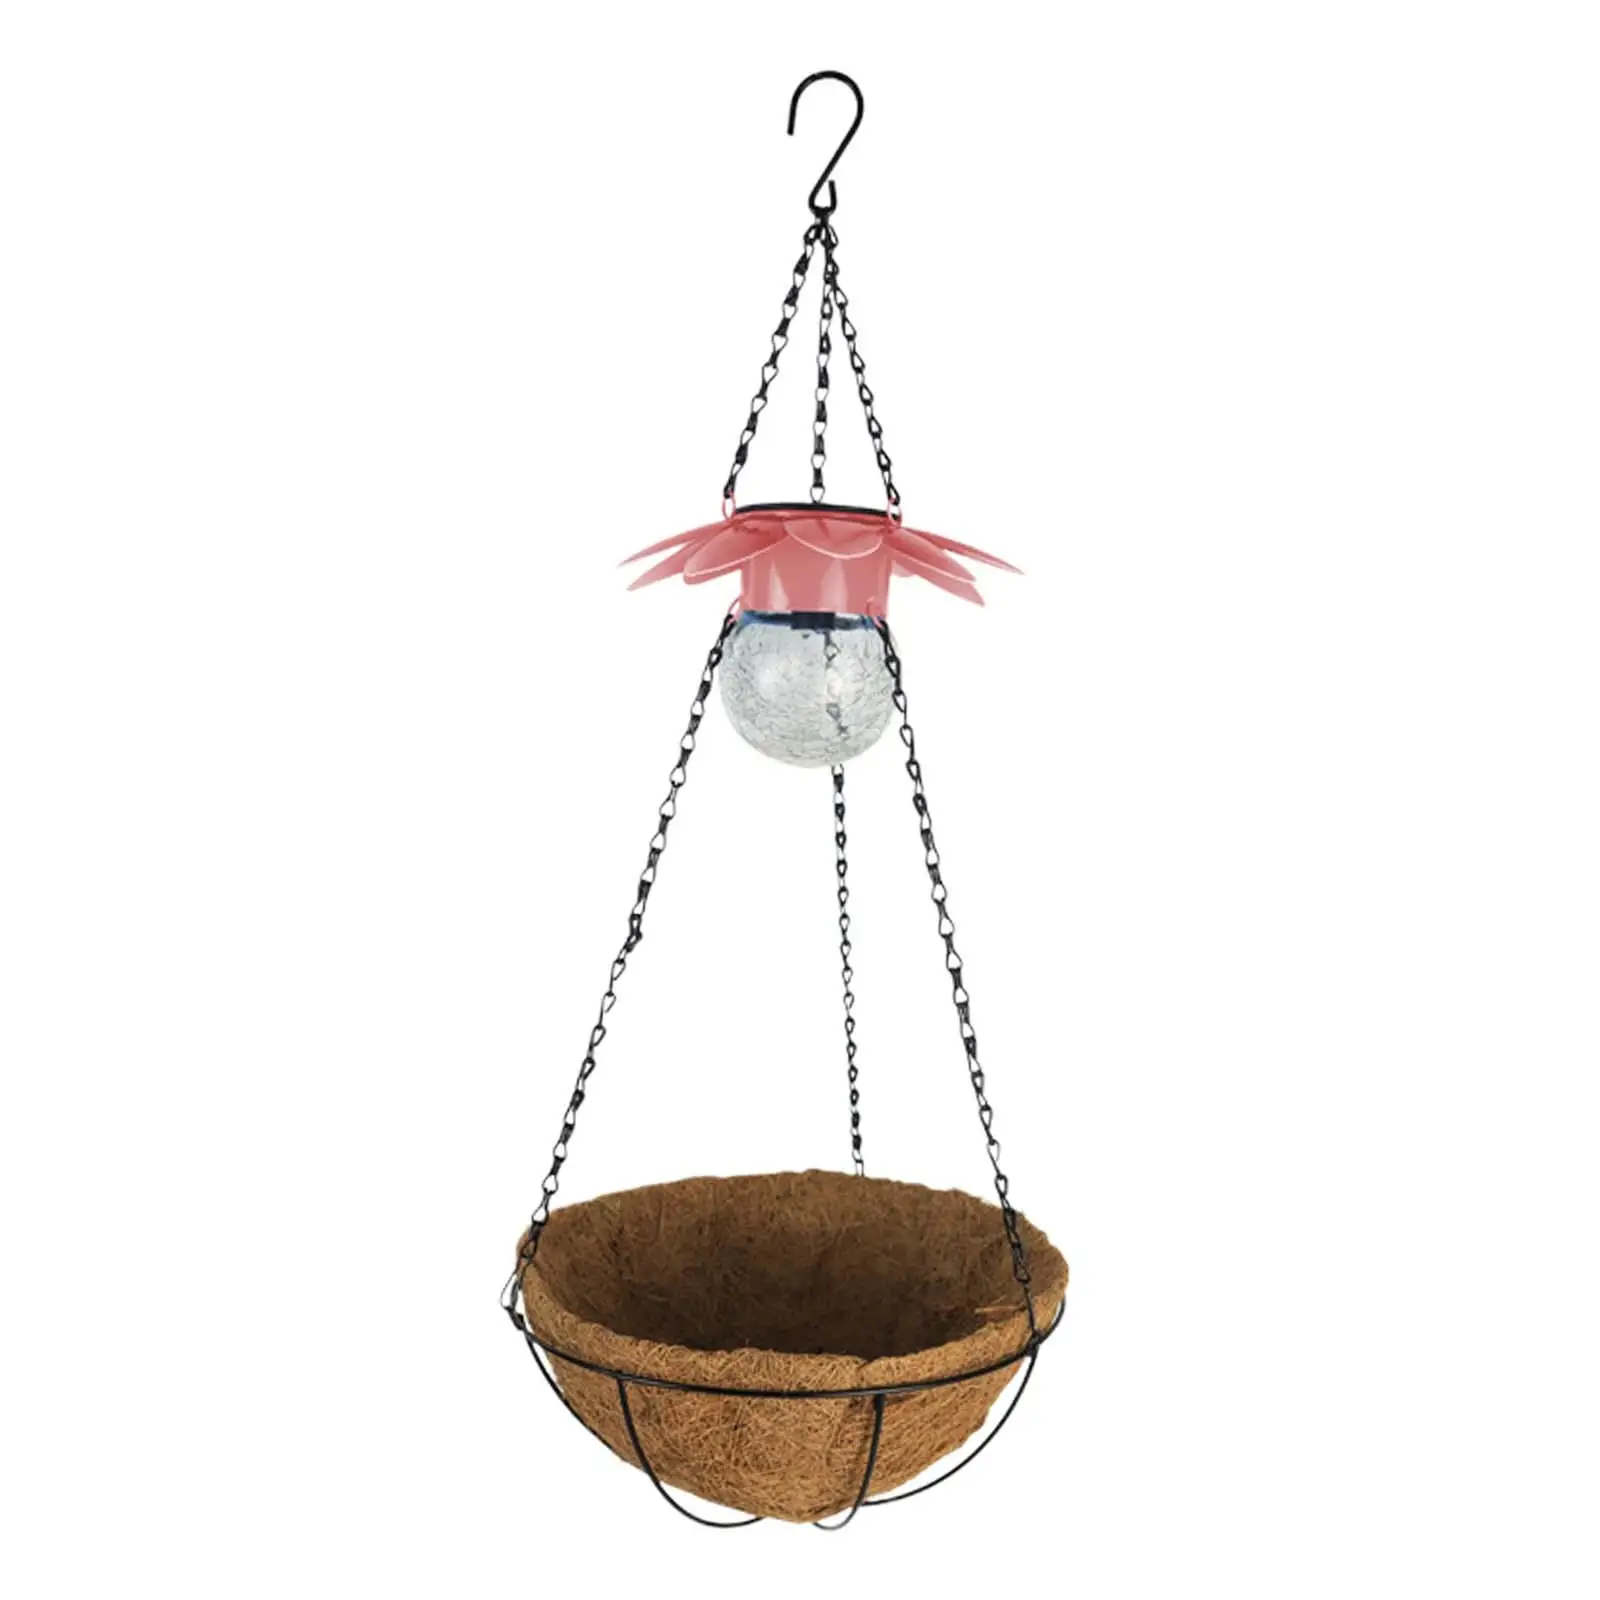 Hanging Basket with Coconut Coir Liner Metal Wire Hanging Planters for Outdoor Balcony Indoor Patio Decoration